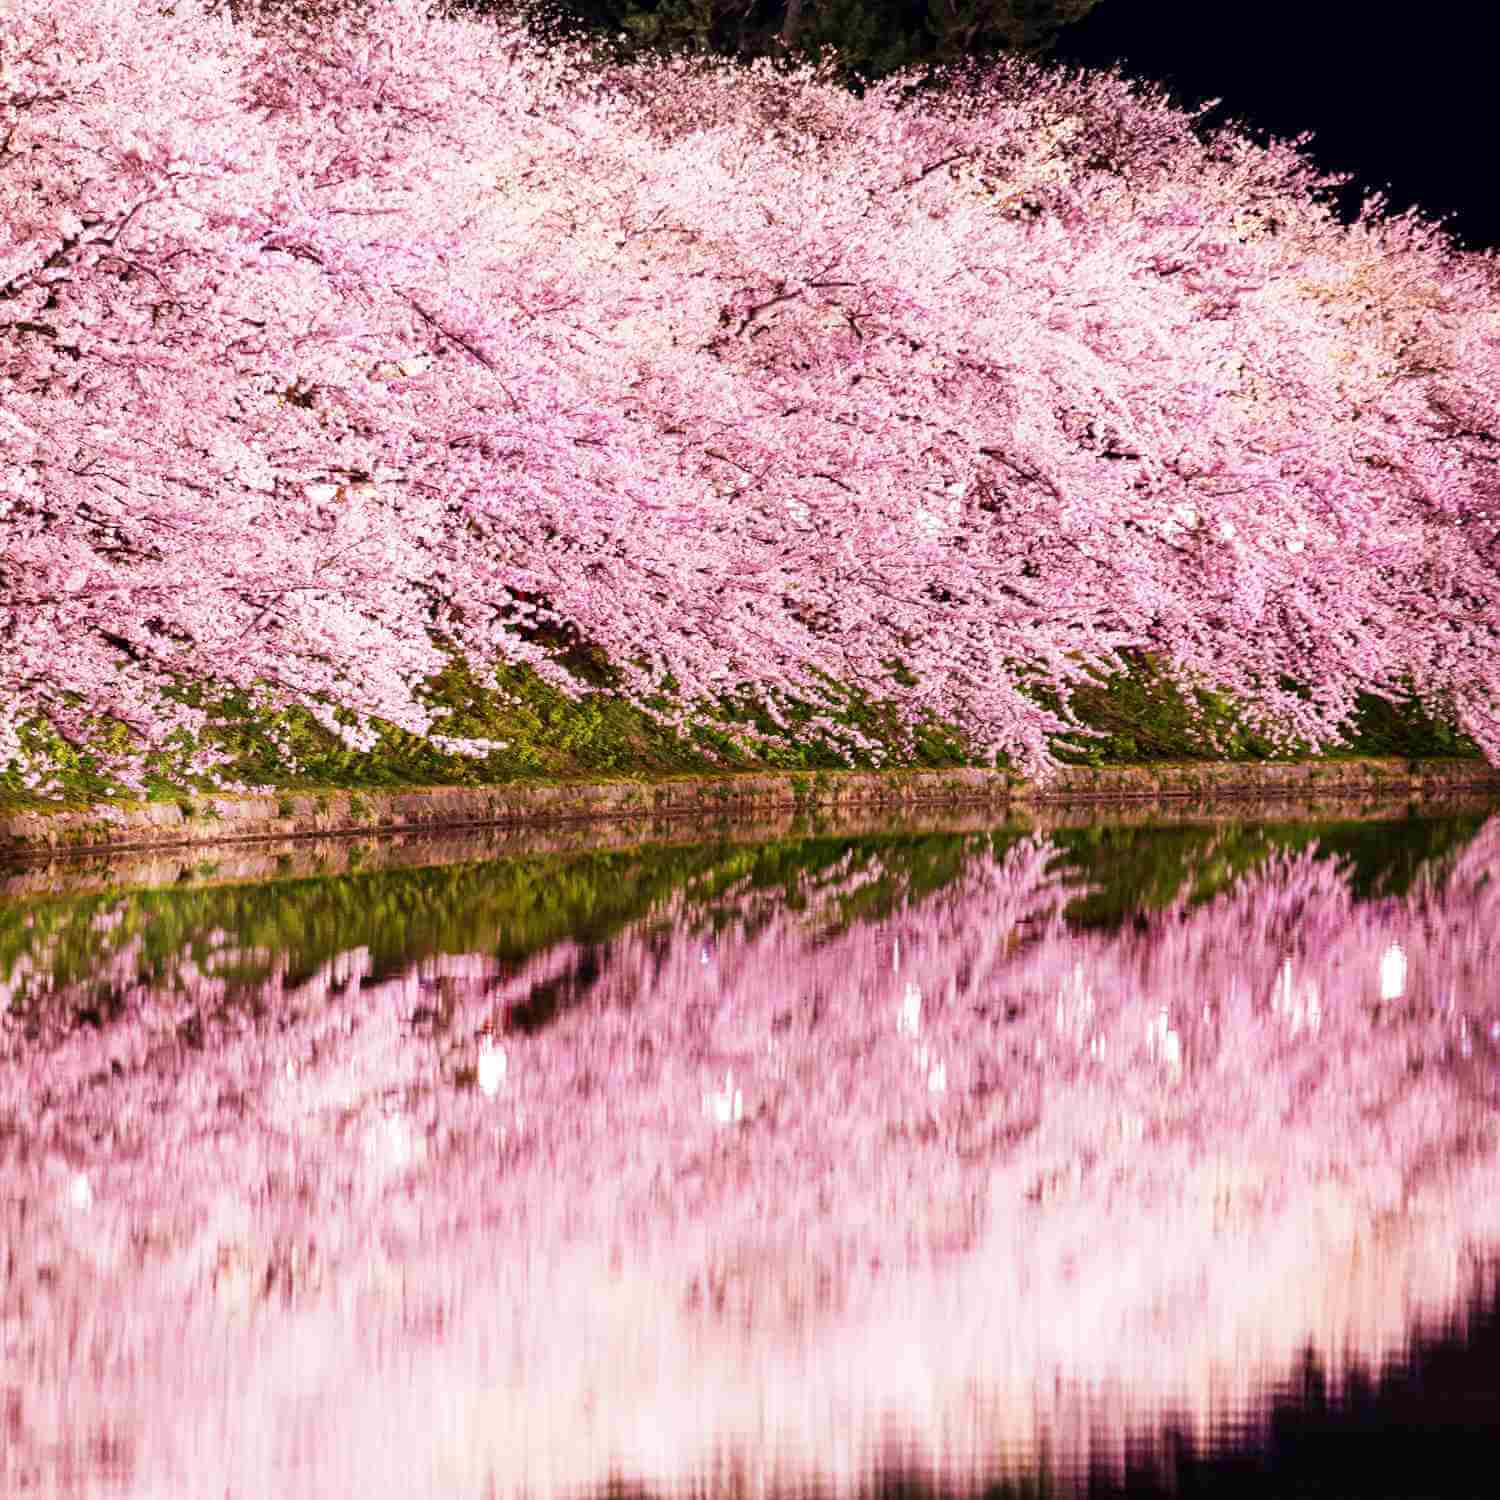 Cherry blossoms in Japan20